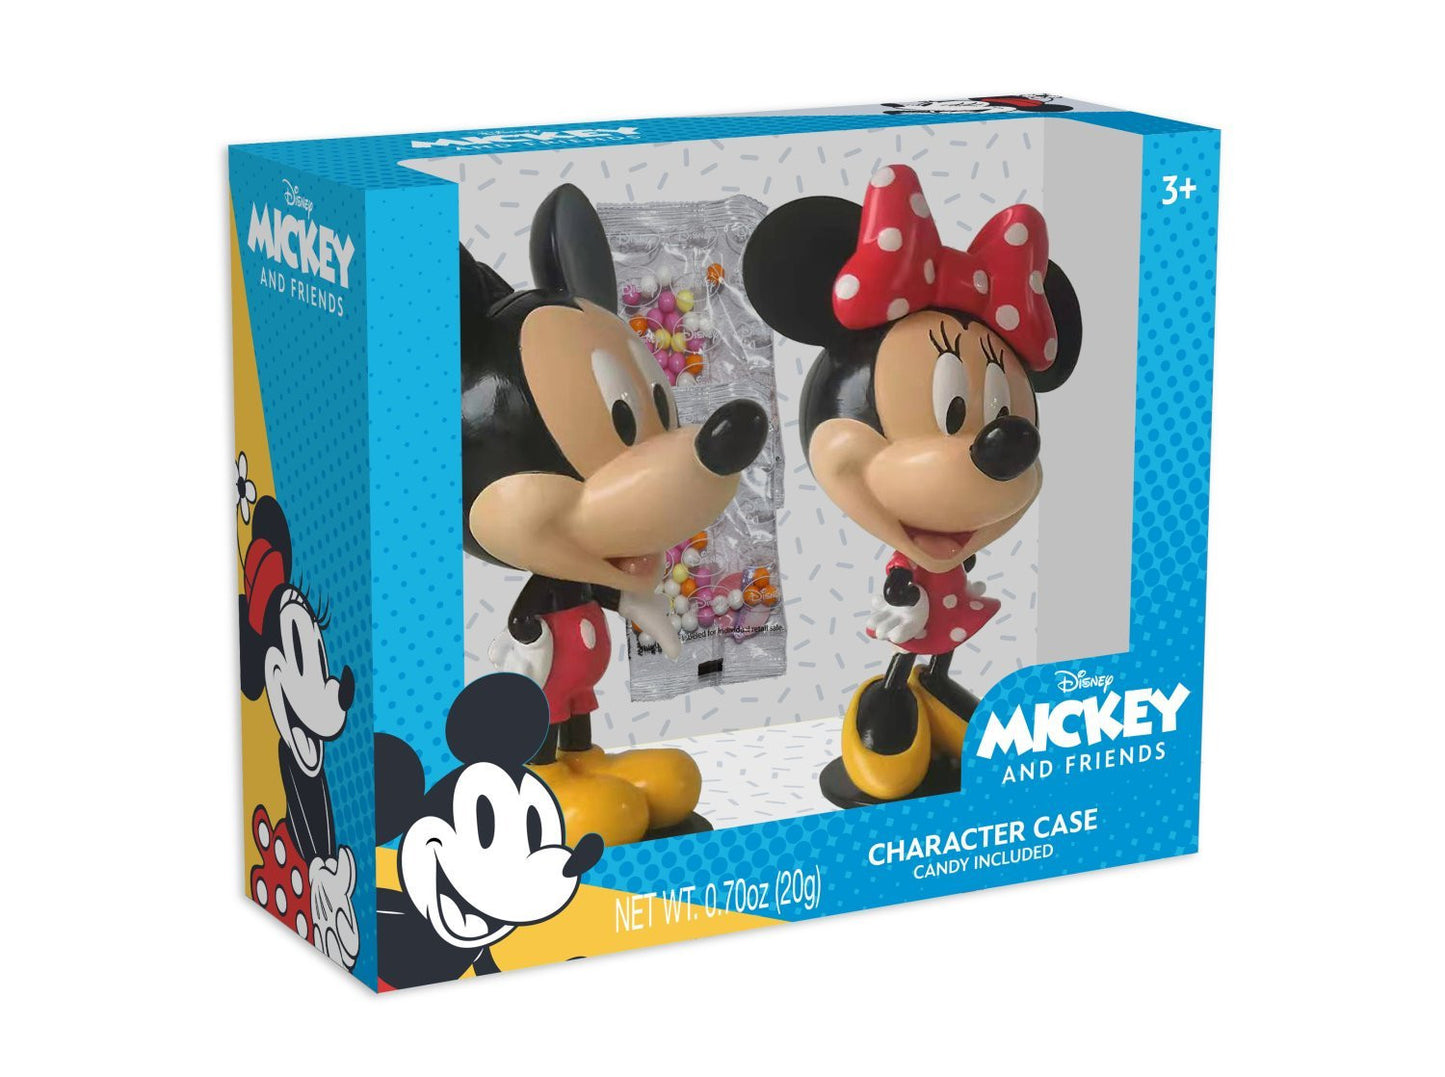 DISNEY MICKEY & MINNIE CANDY CHARACTER CASE 2-PACK